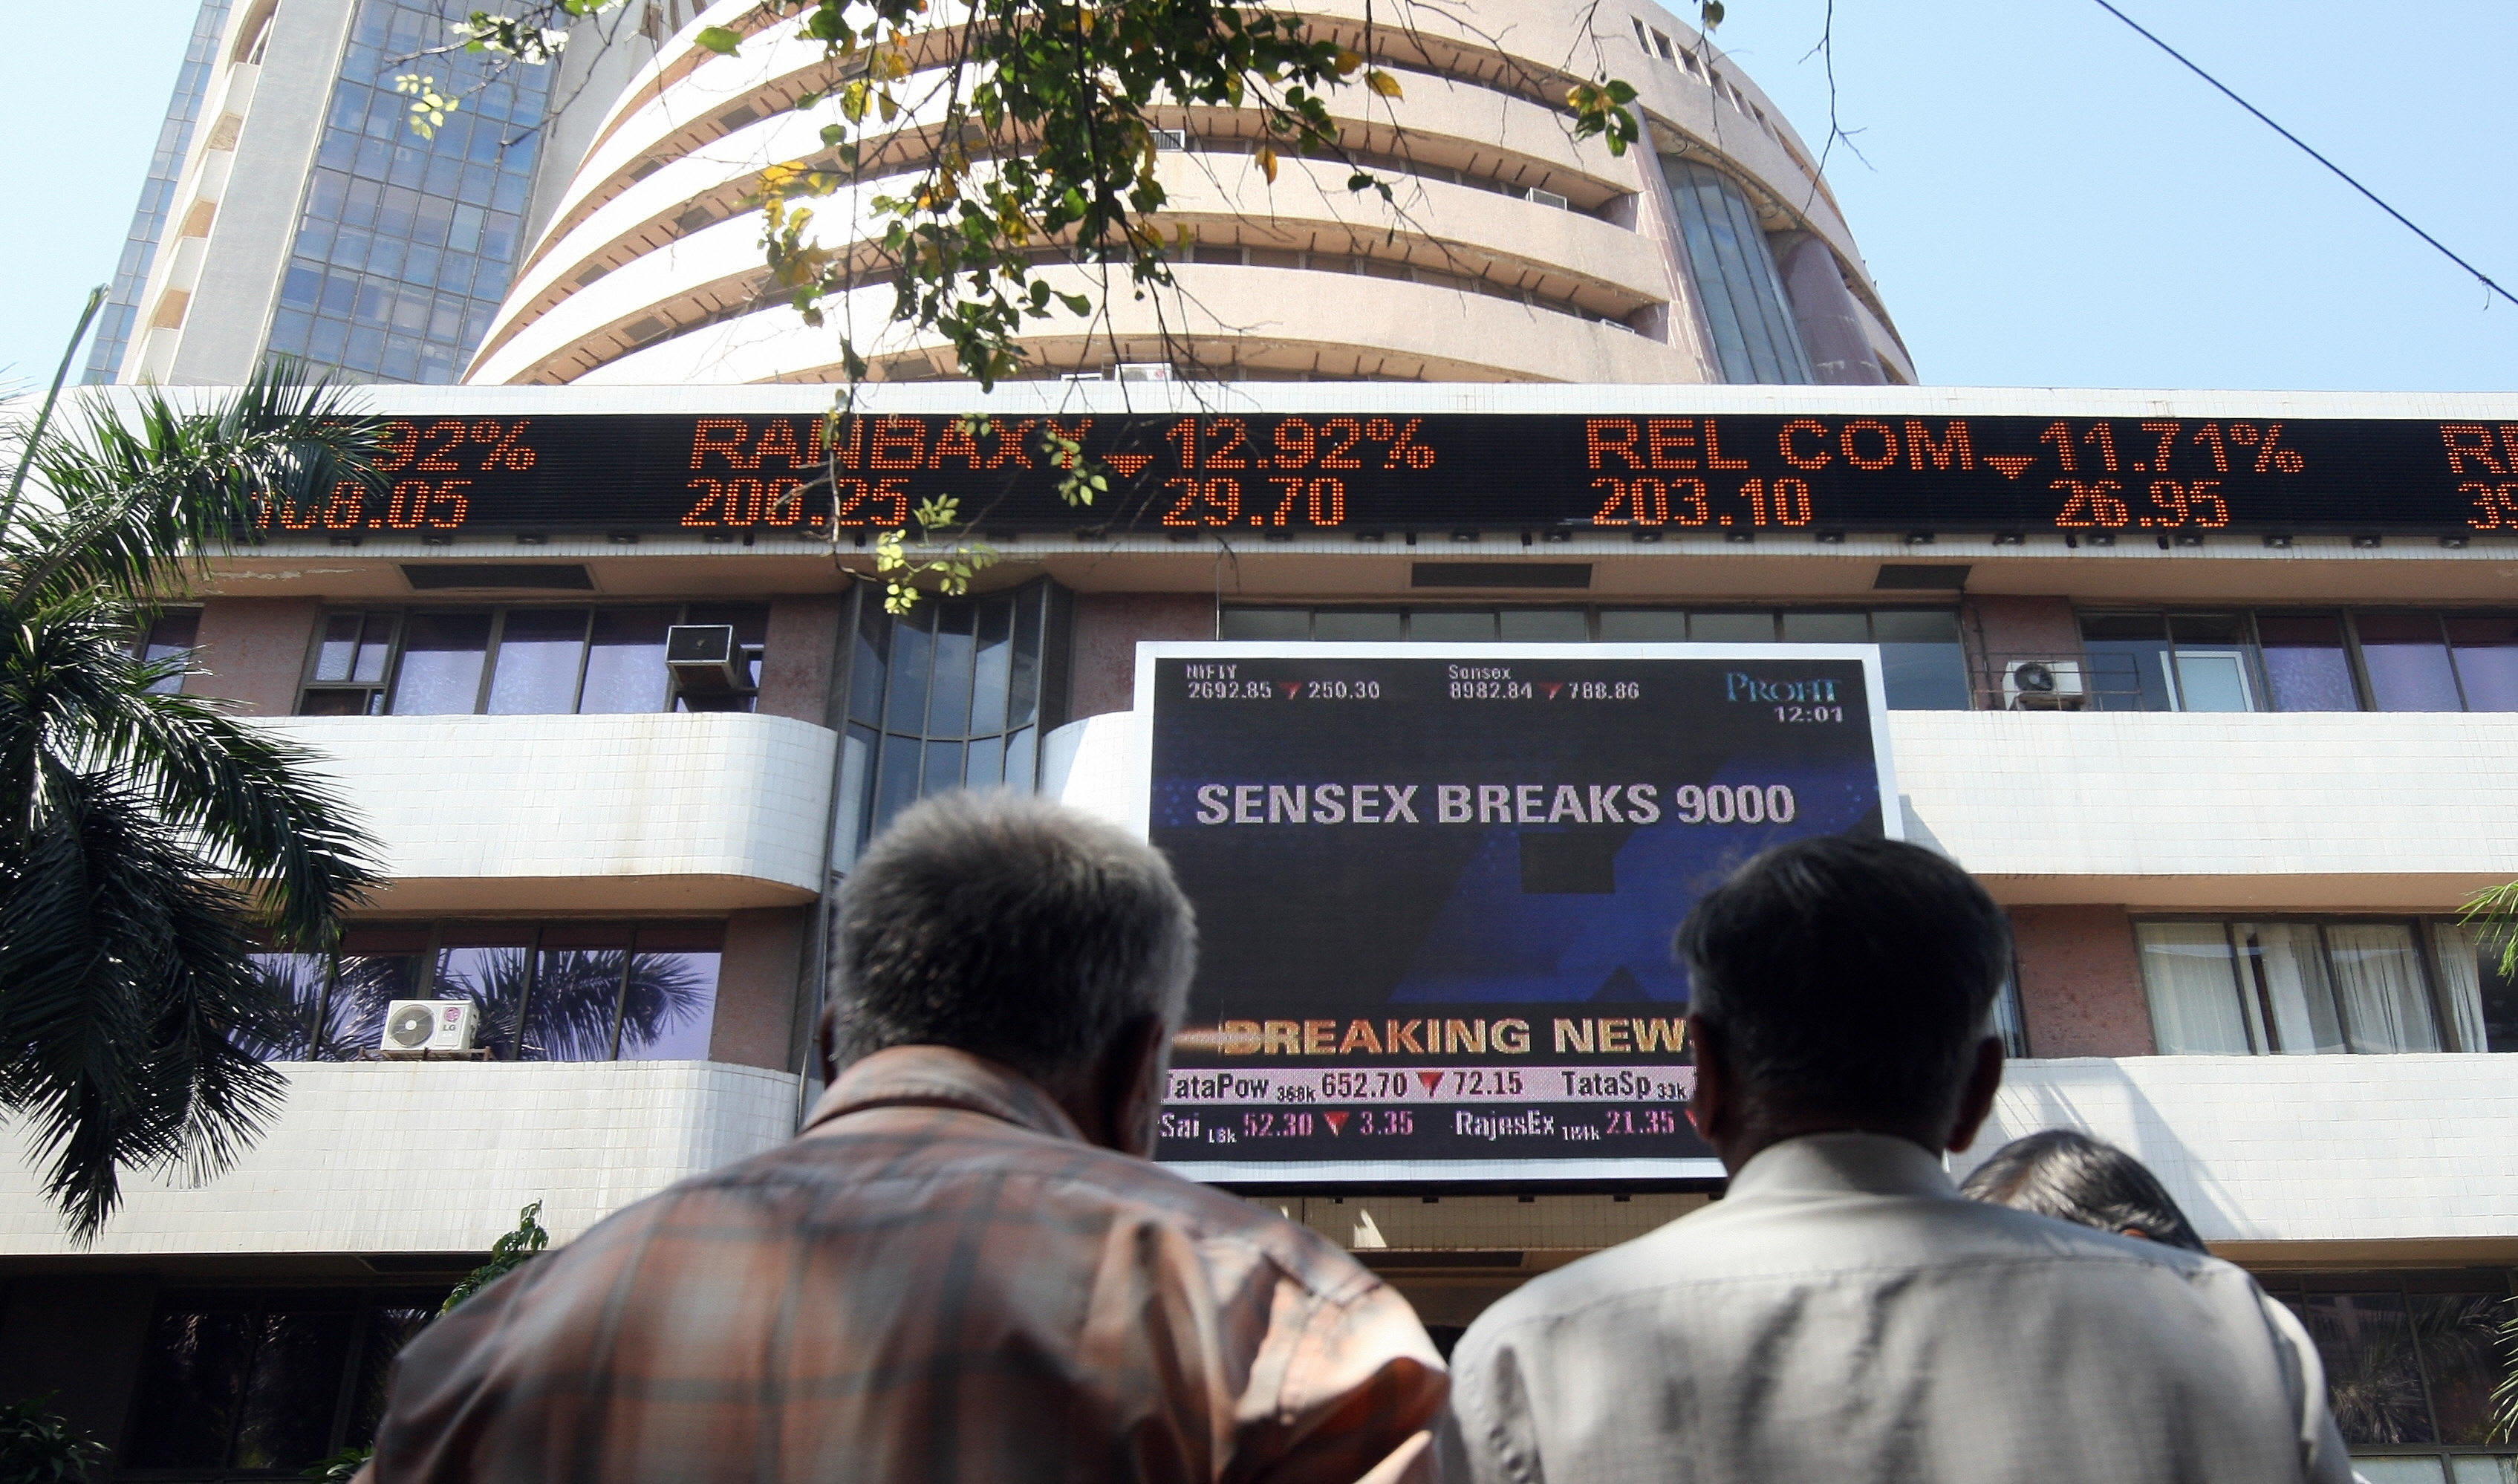 India could surpass the UK as the world's 5th largest stock market by 2024, Gold..